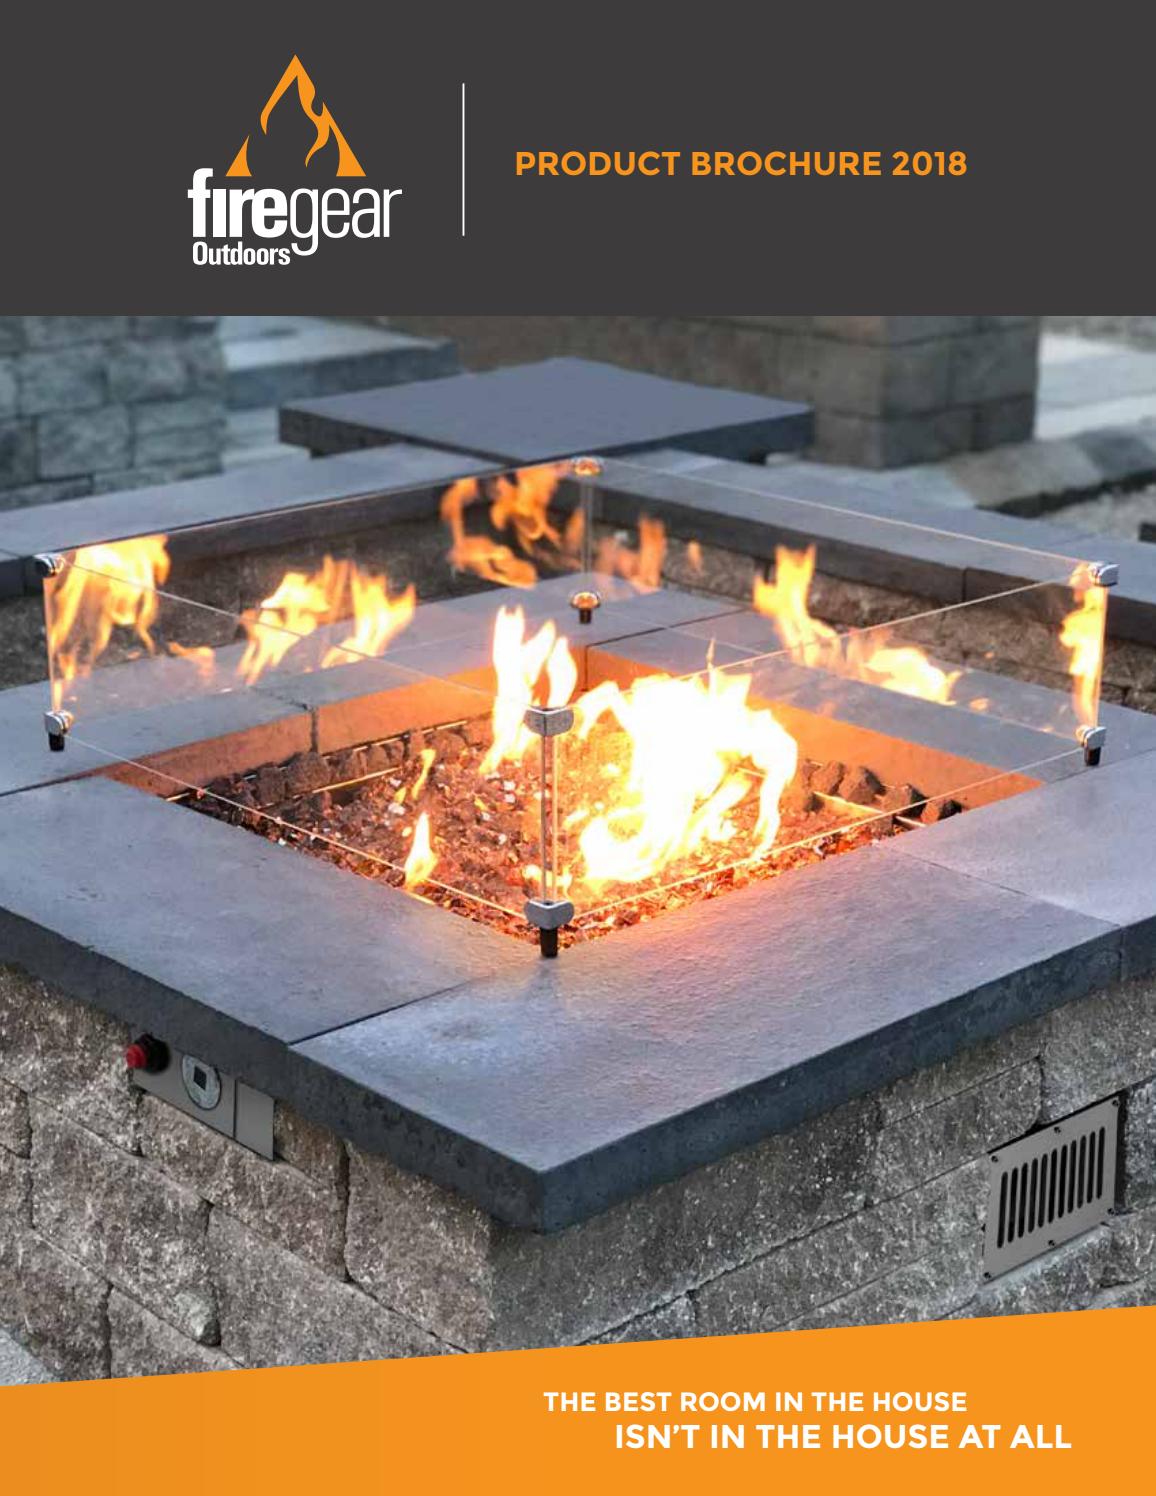 Propane Tank for Gas Fireplace Beautiful Firegear Product Brochure by Skytech Products Group issuu